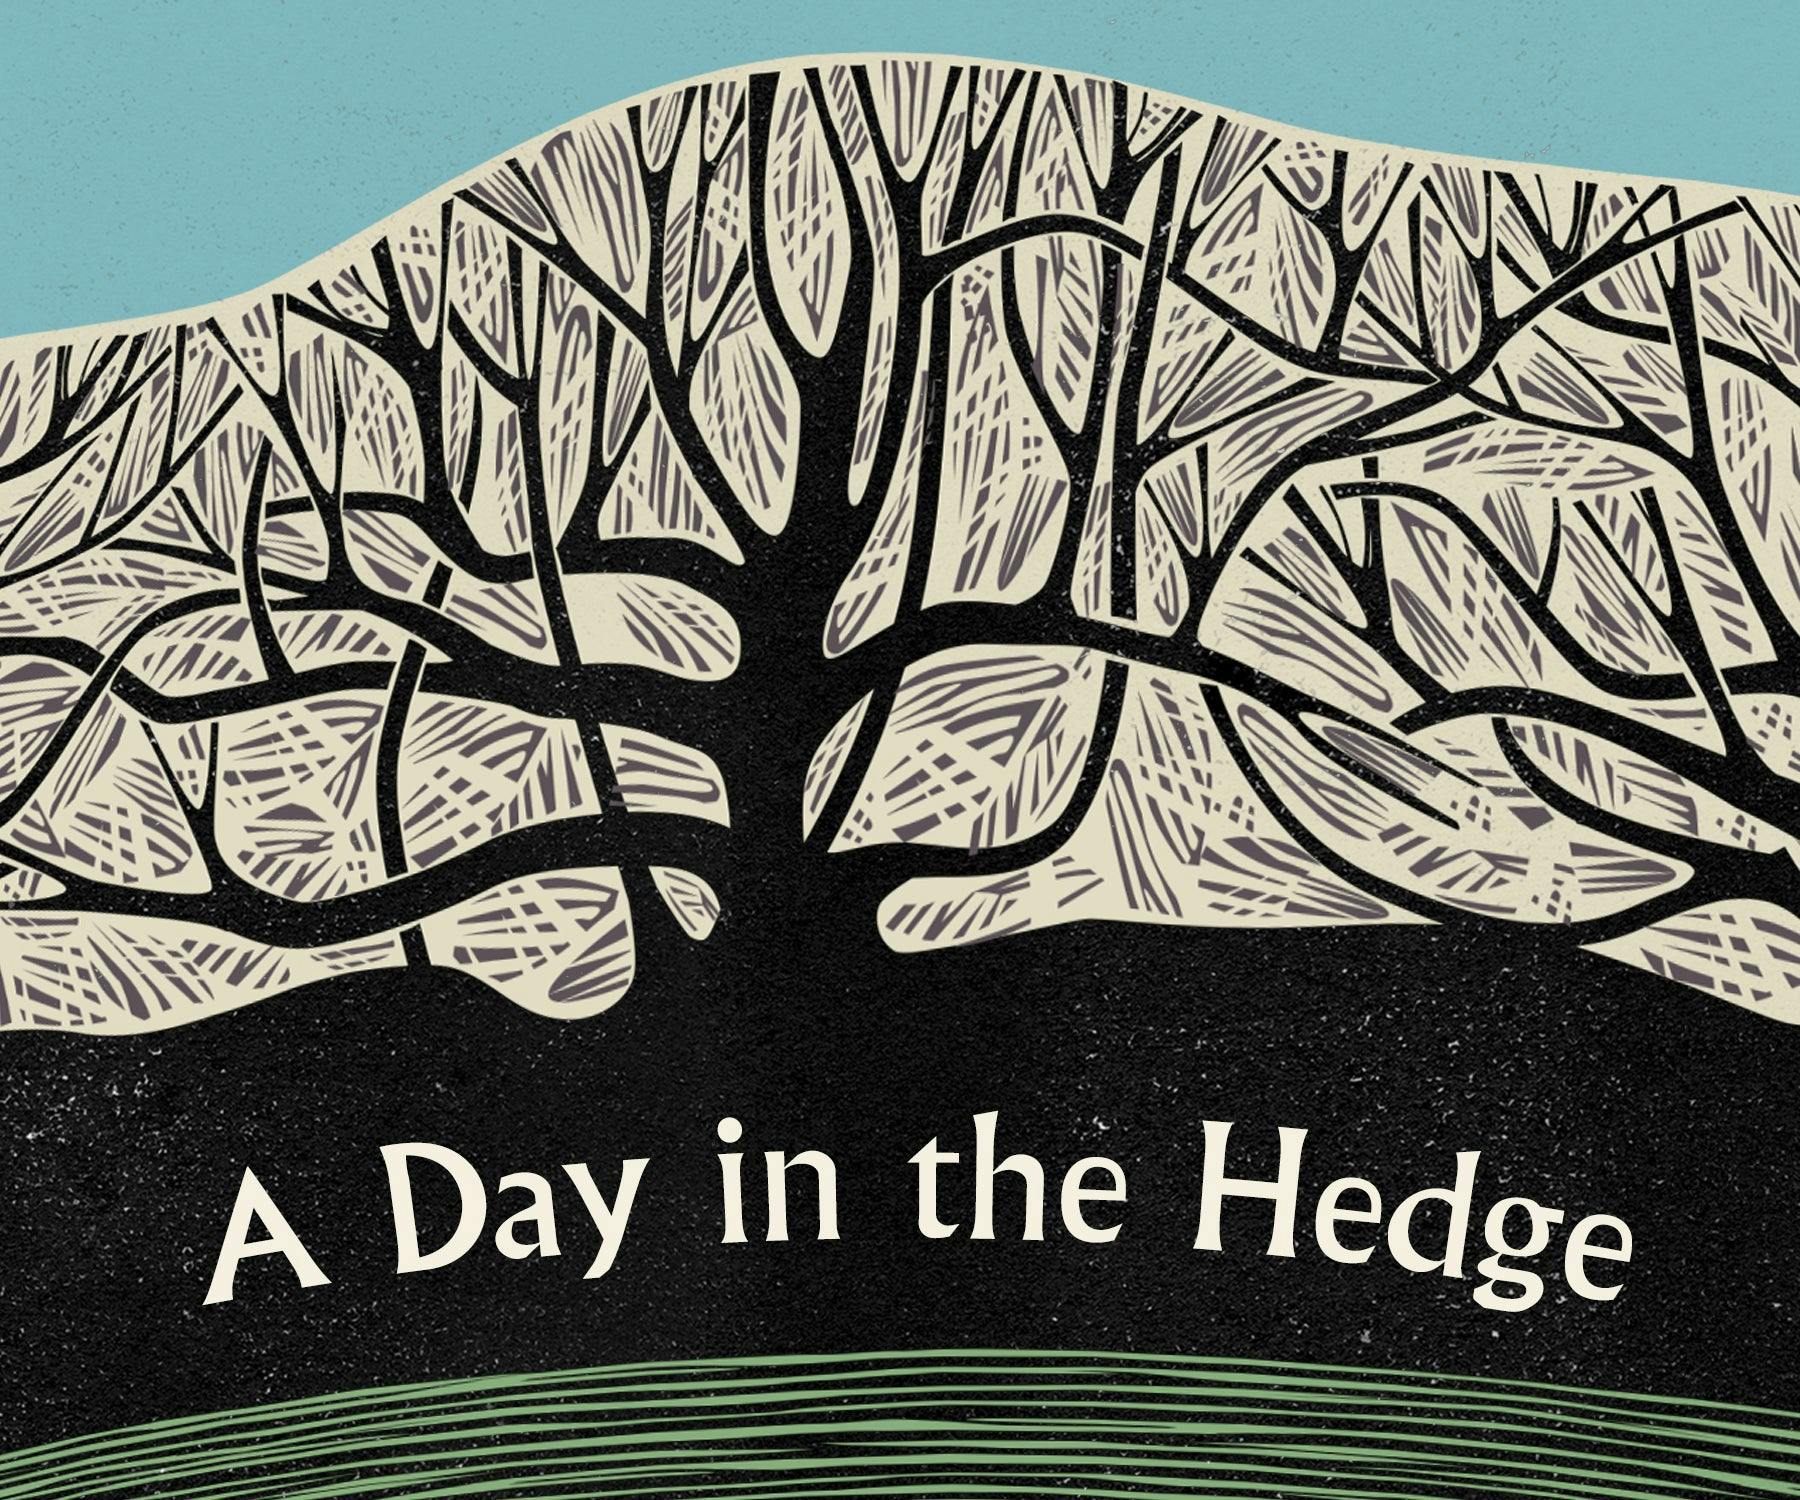 A Day in the Hedge